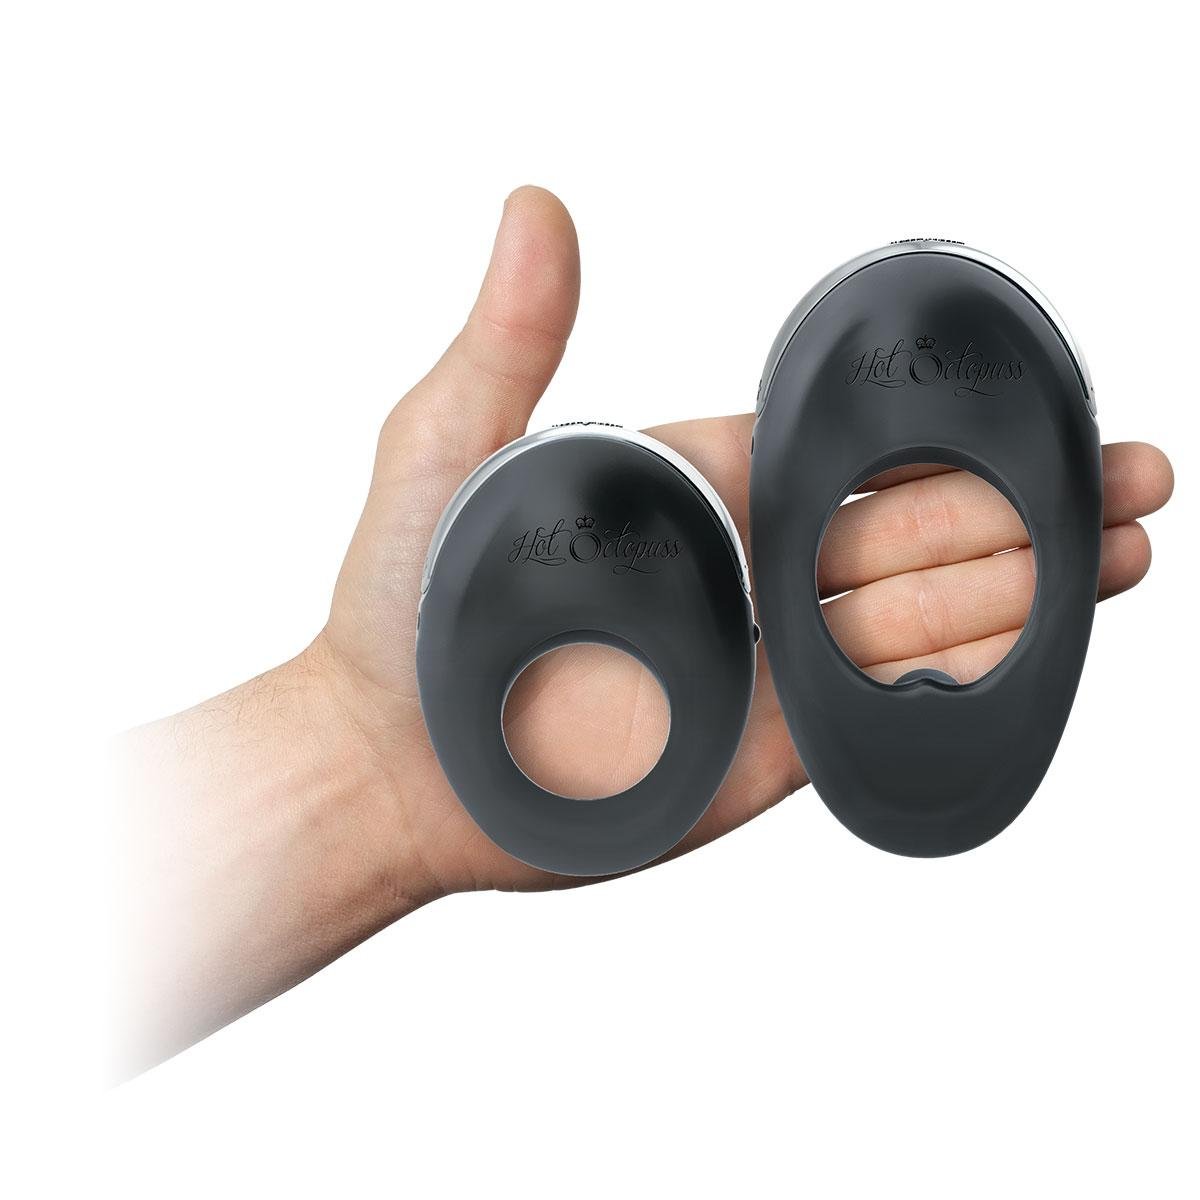 Hot Octopuss Atom C-Ring - Vibrating Cock Ring - Kink Store